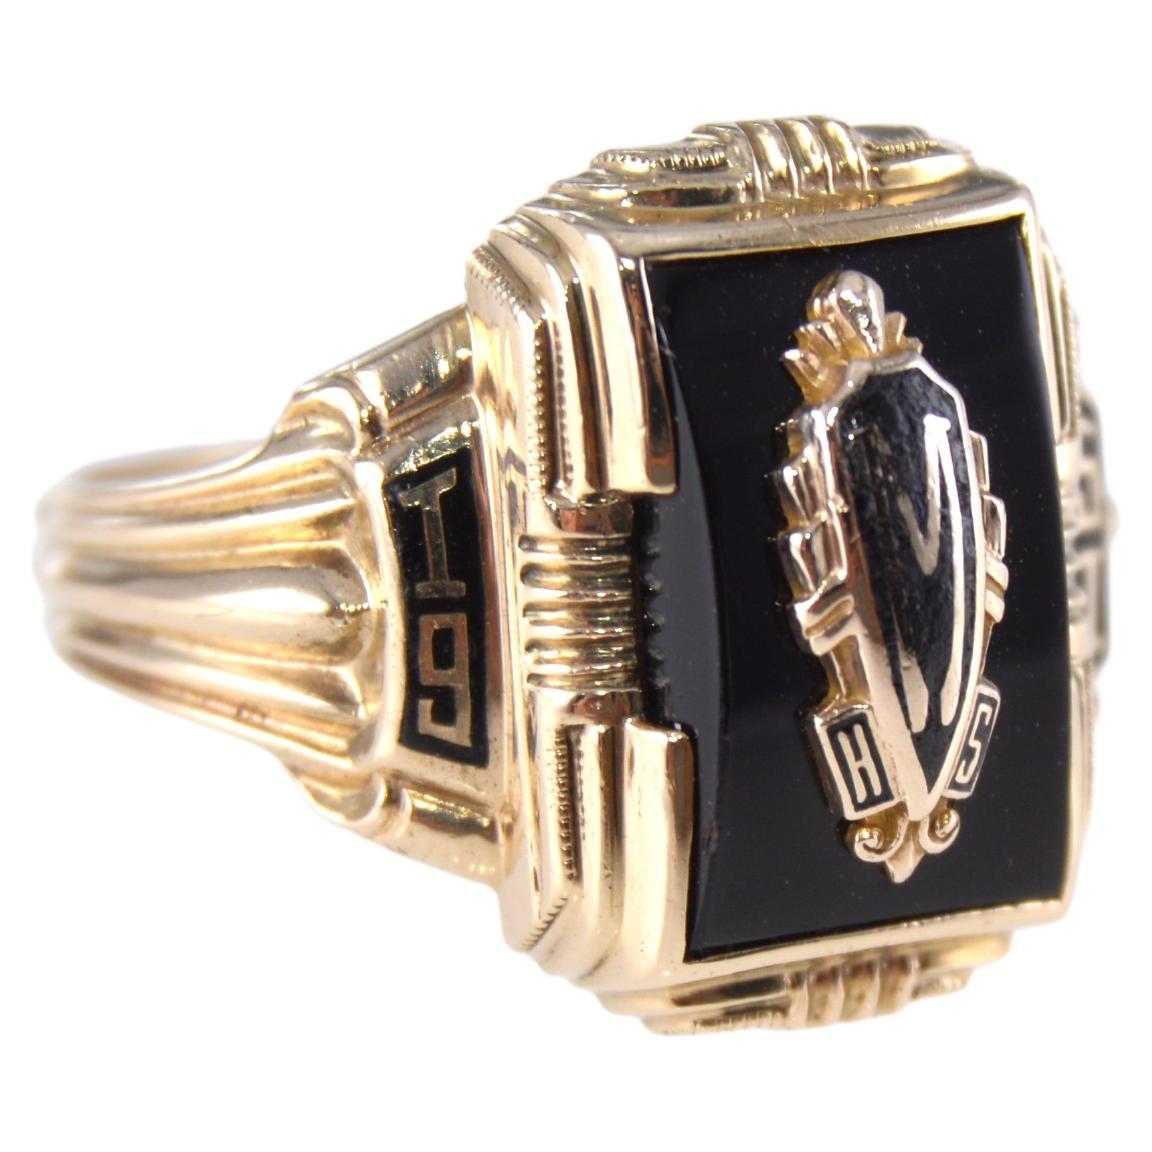 UNISEX RING
STYLE / REFERENCE: Art Deco
METAL / MATERIAL: 10Kt. Solid Gold
CIRCA / YEAR: 1951
SIZE: 6.25

This is a darling, High School class ring crafted in 10Kt Solid Yellow Gold in a classic Art Deco Style design with a stylized gold and enamel